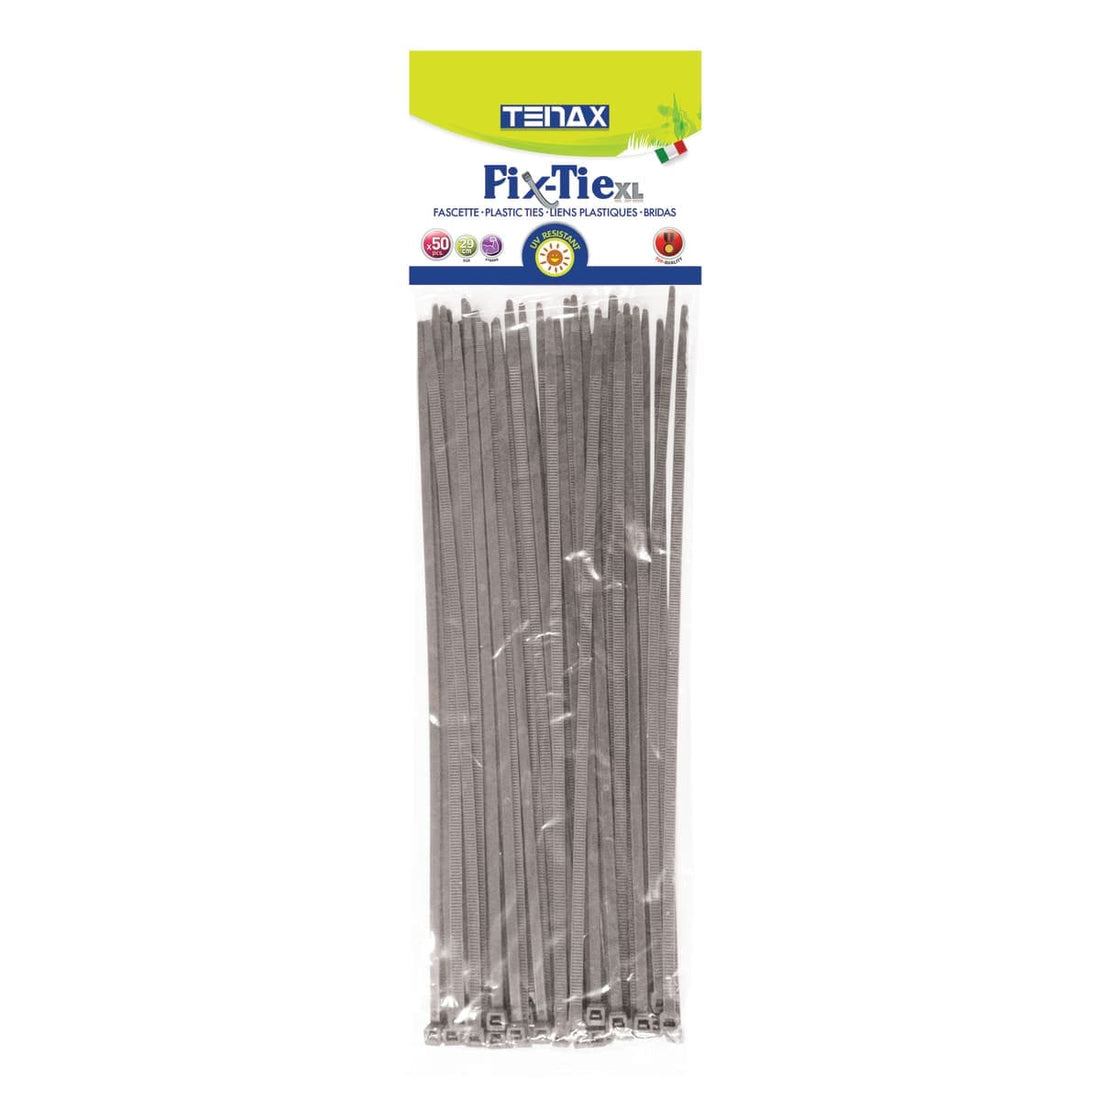 50 CABLE TIES 30 CM SILVER FIX-TIE XL - best price from Maltashopper.com BR500010687